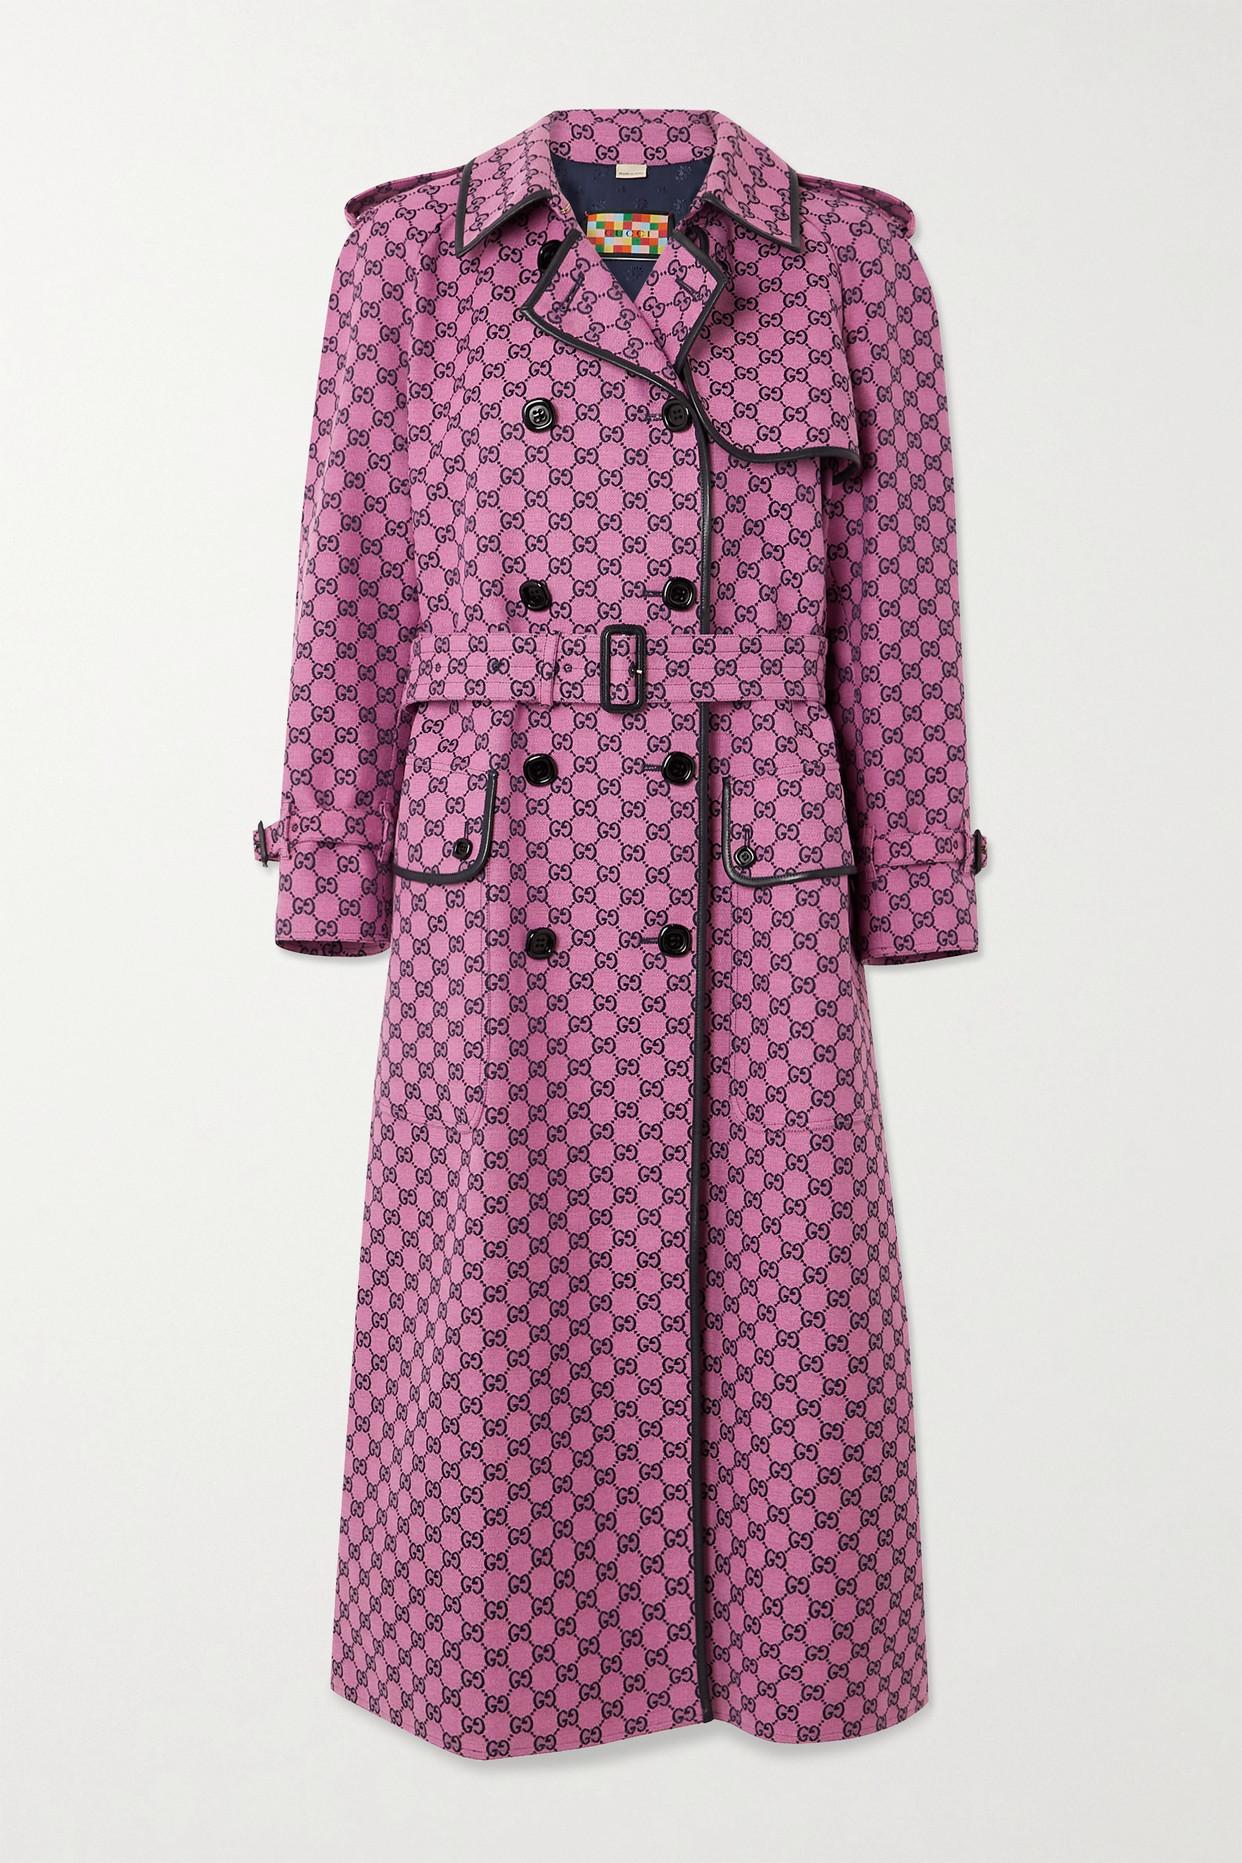 Gg Multicolour Belted Leather-trimmed Cotton-blend Jacquard Trench Coat in Pink | Lyst